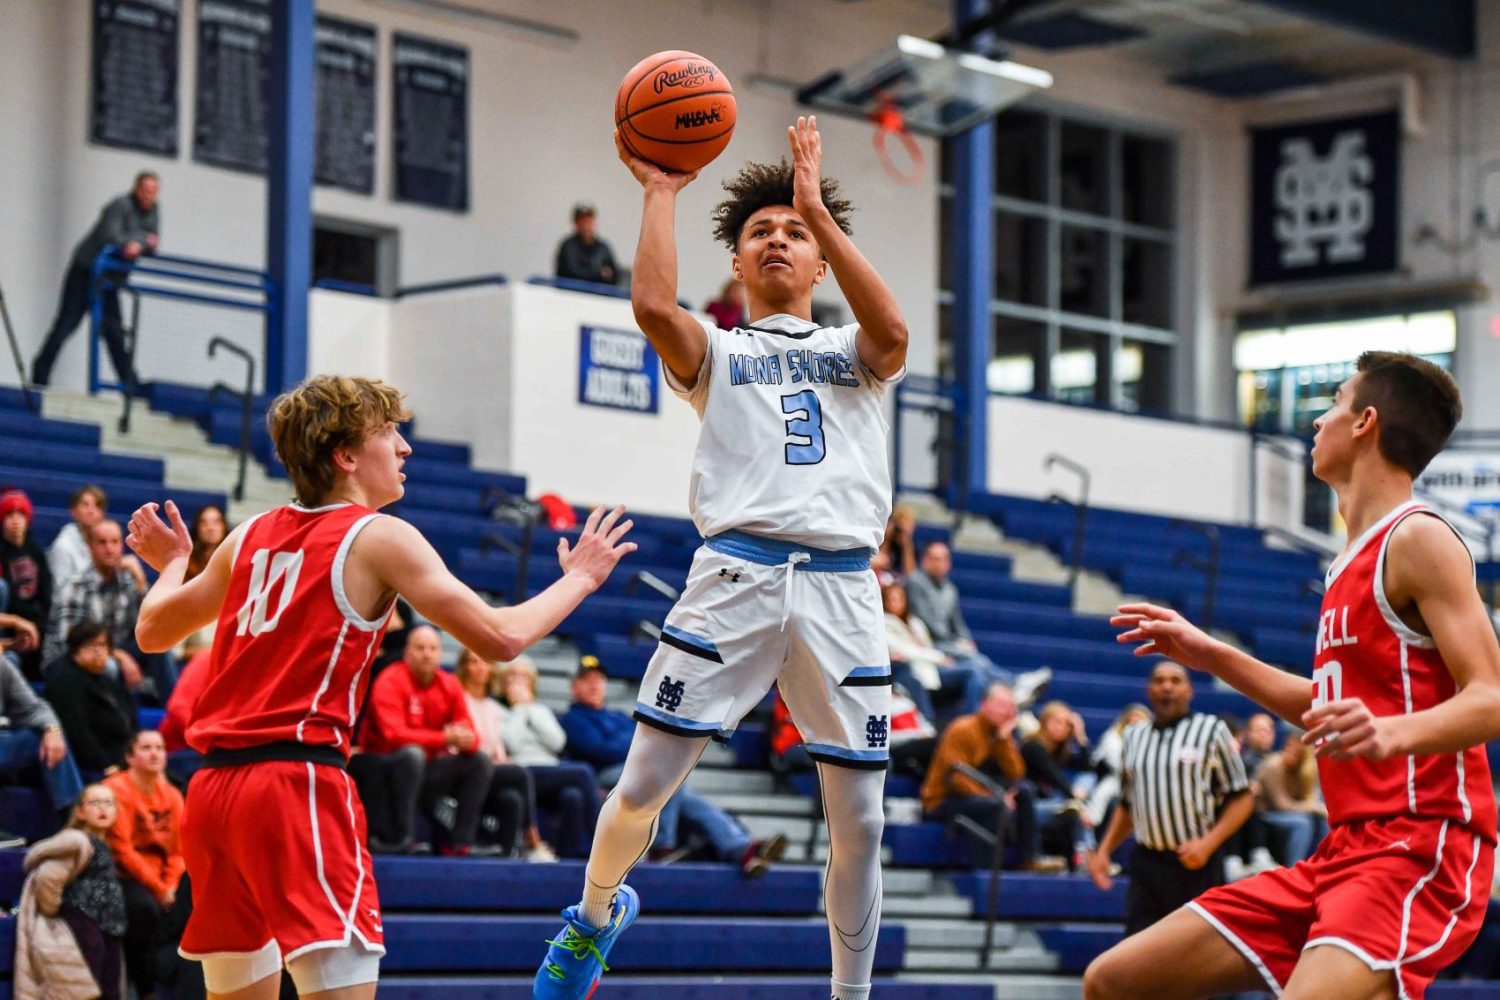 Mona Shores boys falls short in non-league battle with Lowell